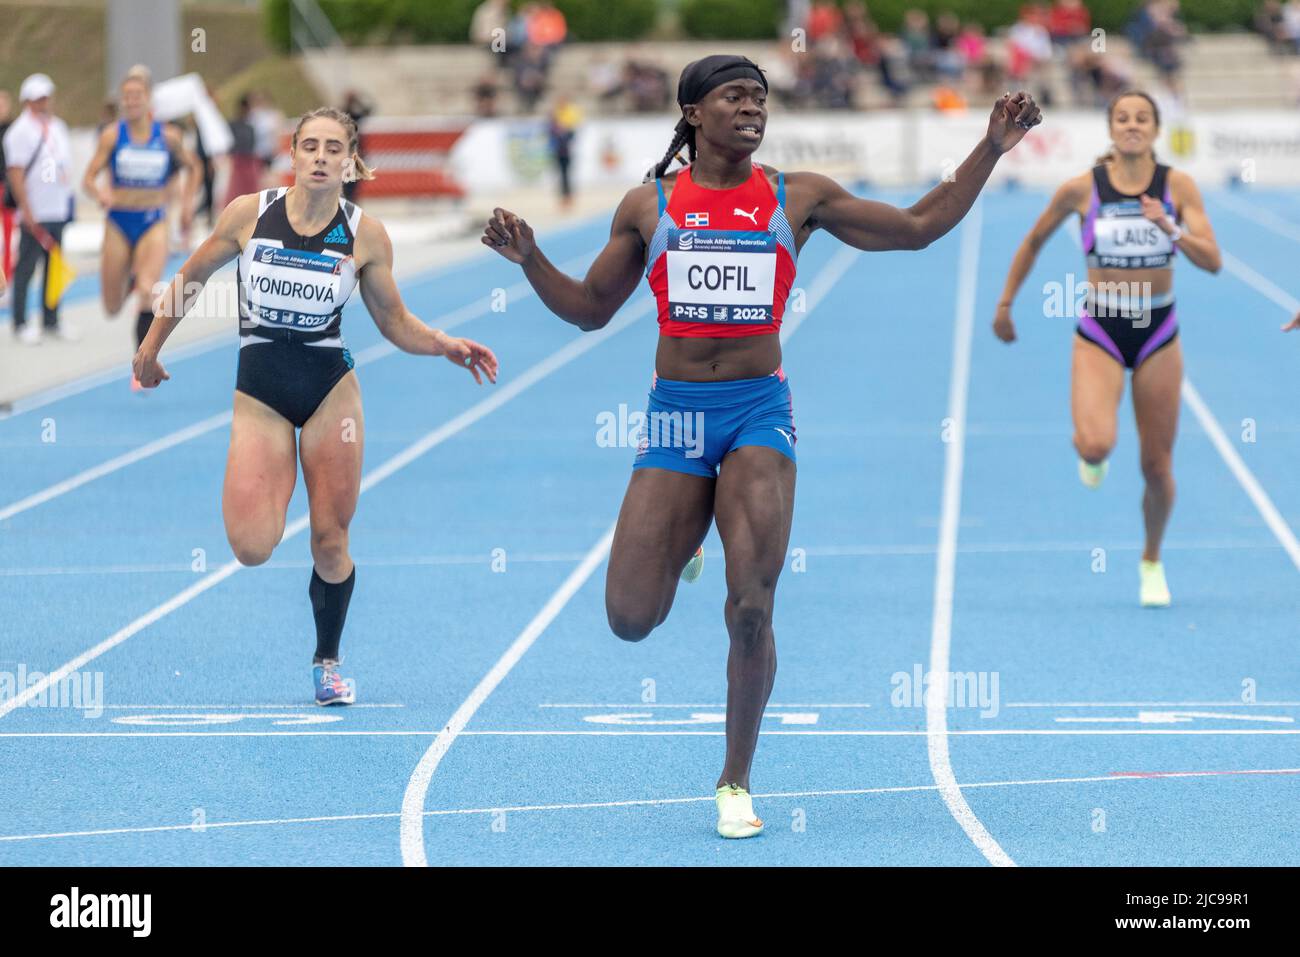 Fiordaliza Cofil of Dominican Republic (centre) wins 400 metres women run at the P-T-S athletics meeting in the sports site of x-bionic sphere® in Šamorín, Slovakia, 9. June 2022 Stock Photo